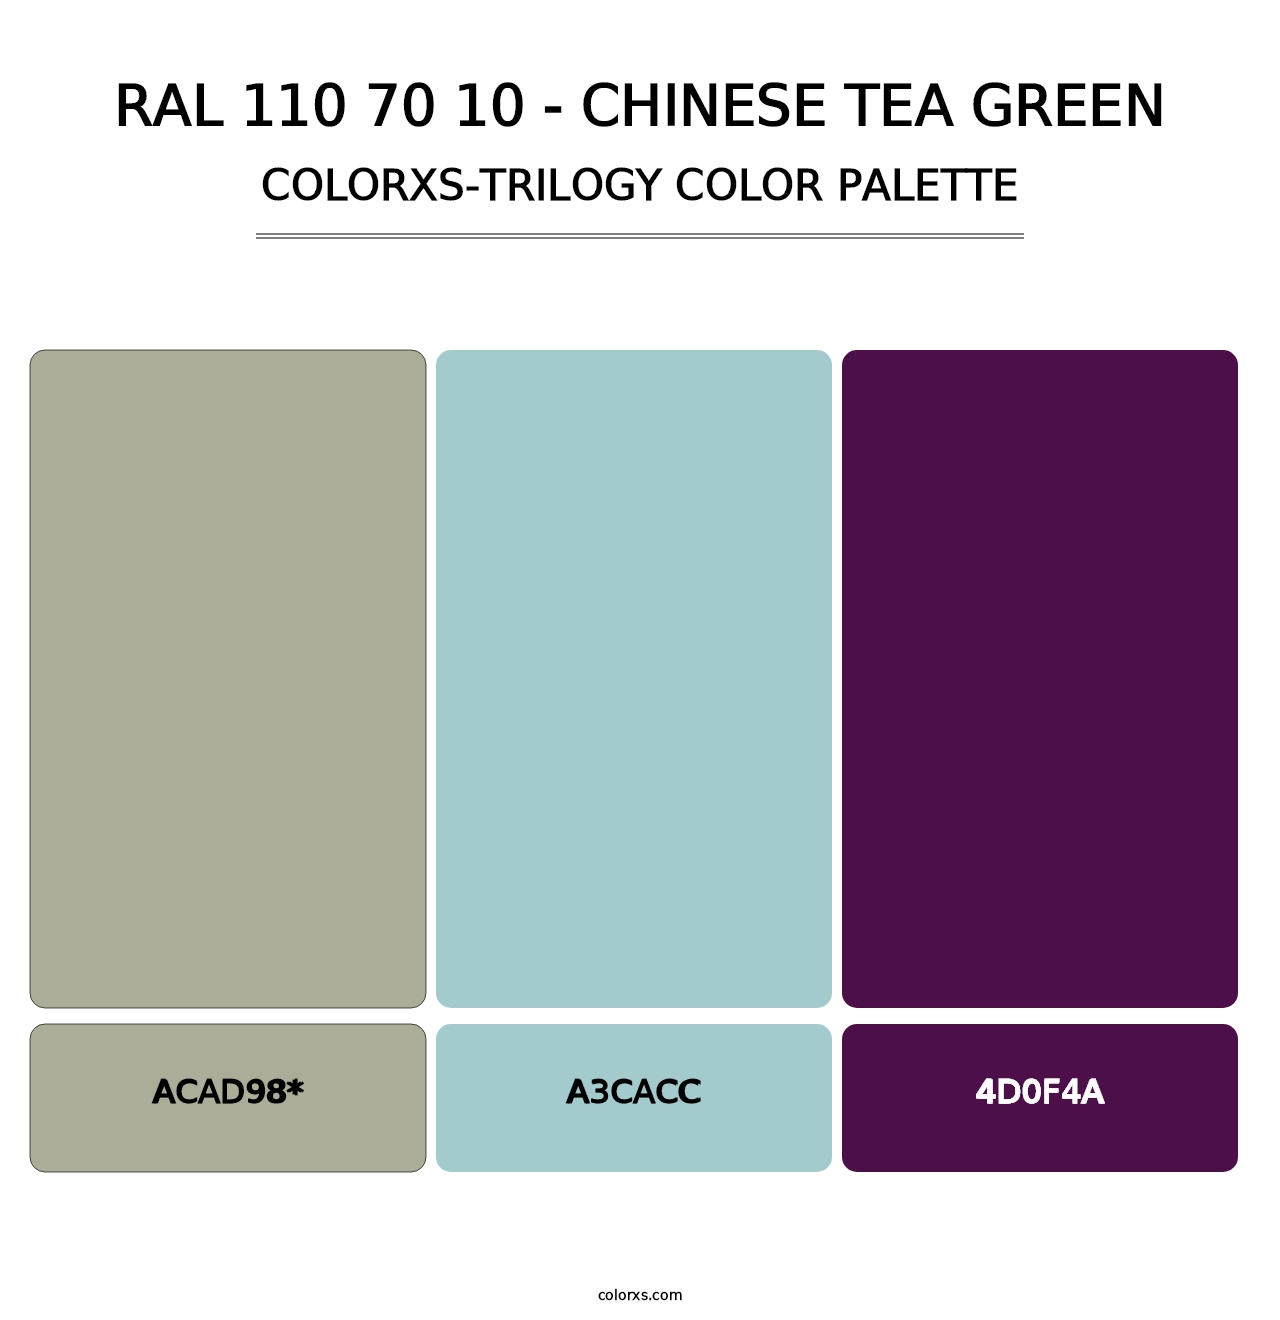 RAL 110 70 10 - Chinese Tea Green - Colorxs Trilogy Palette